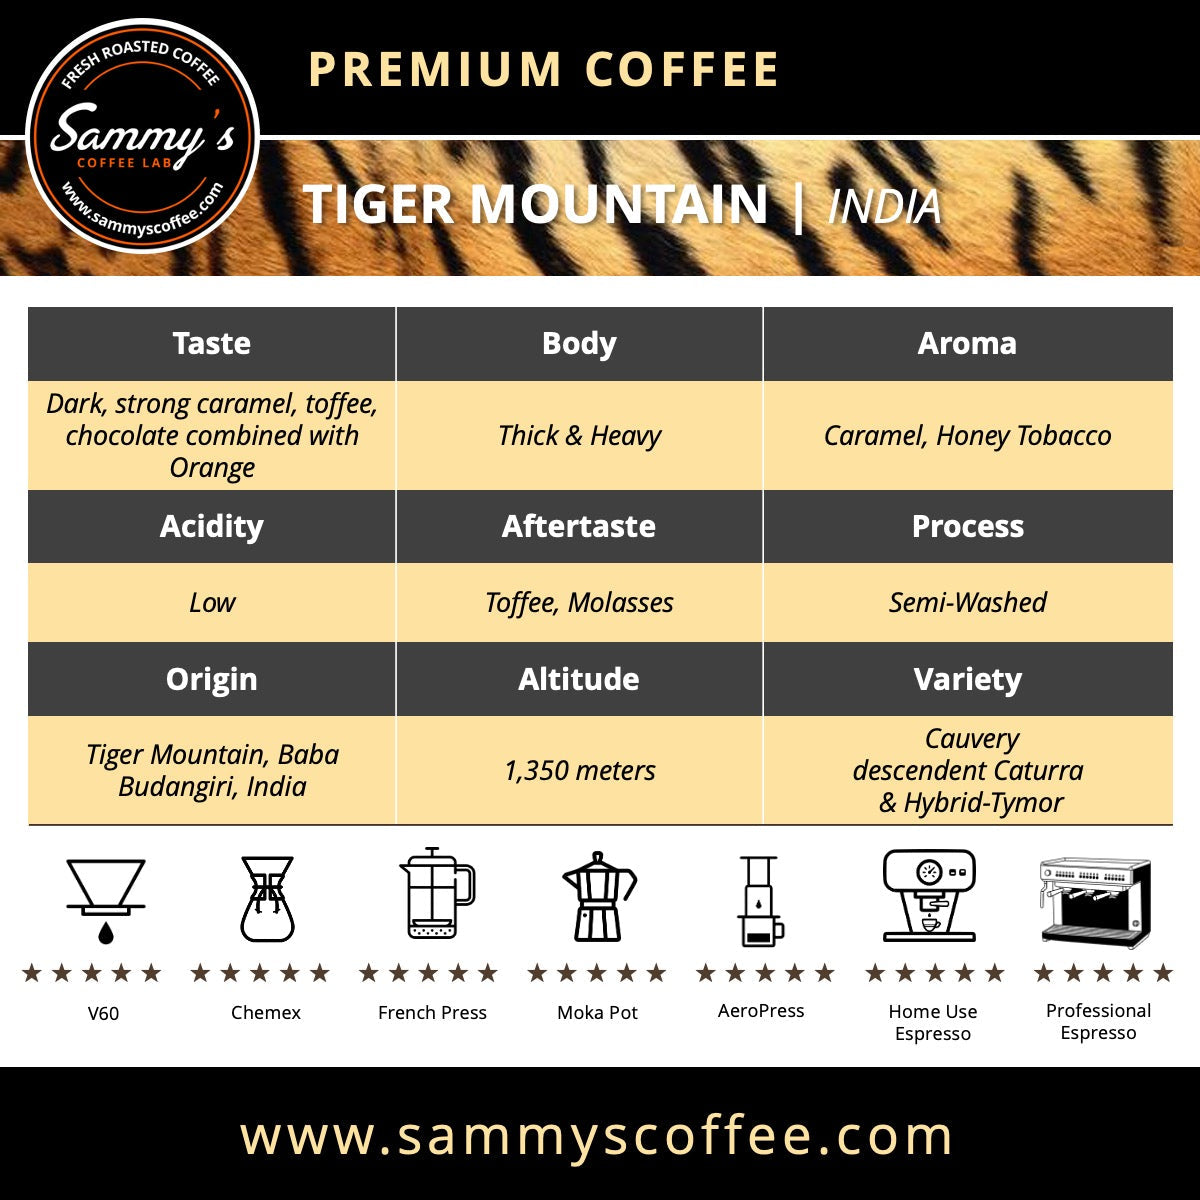 Tiger Mountain Extra Bold Nuggets | India - Sammy's Coffee 